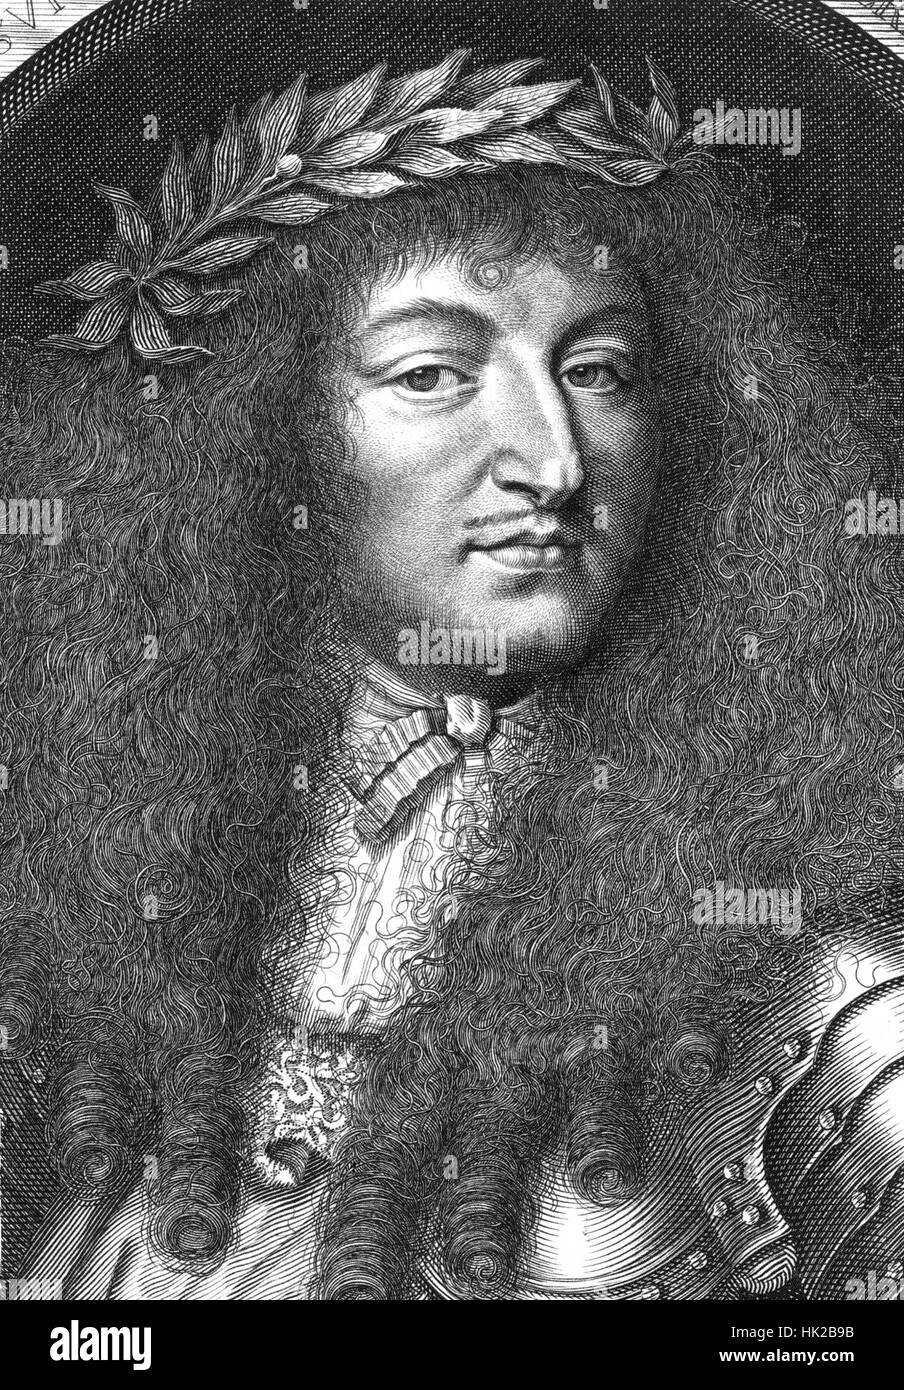 LOUIS XIV of France in an engraving about 1700 Stock Photo